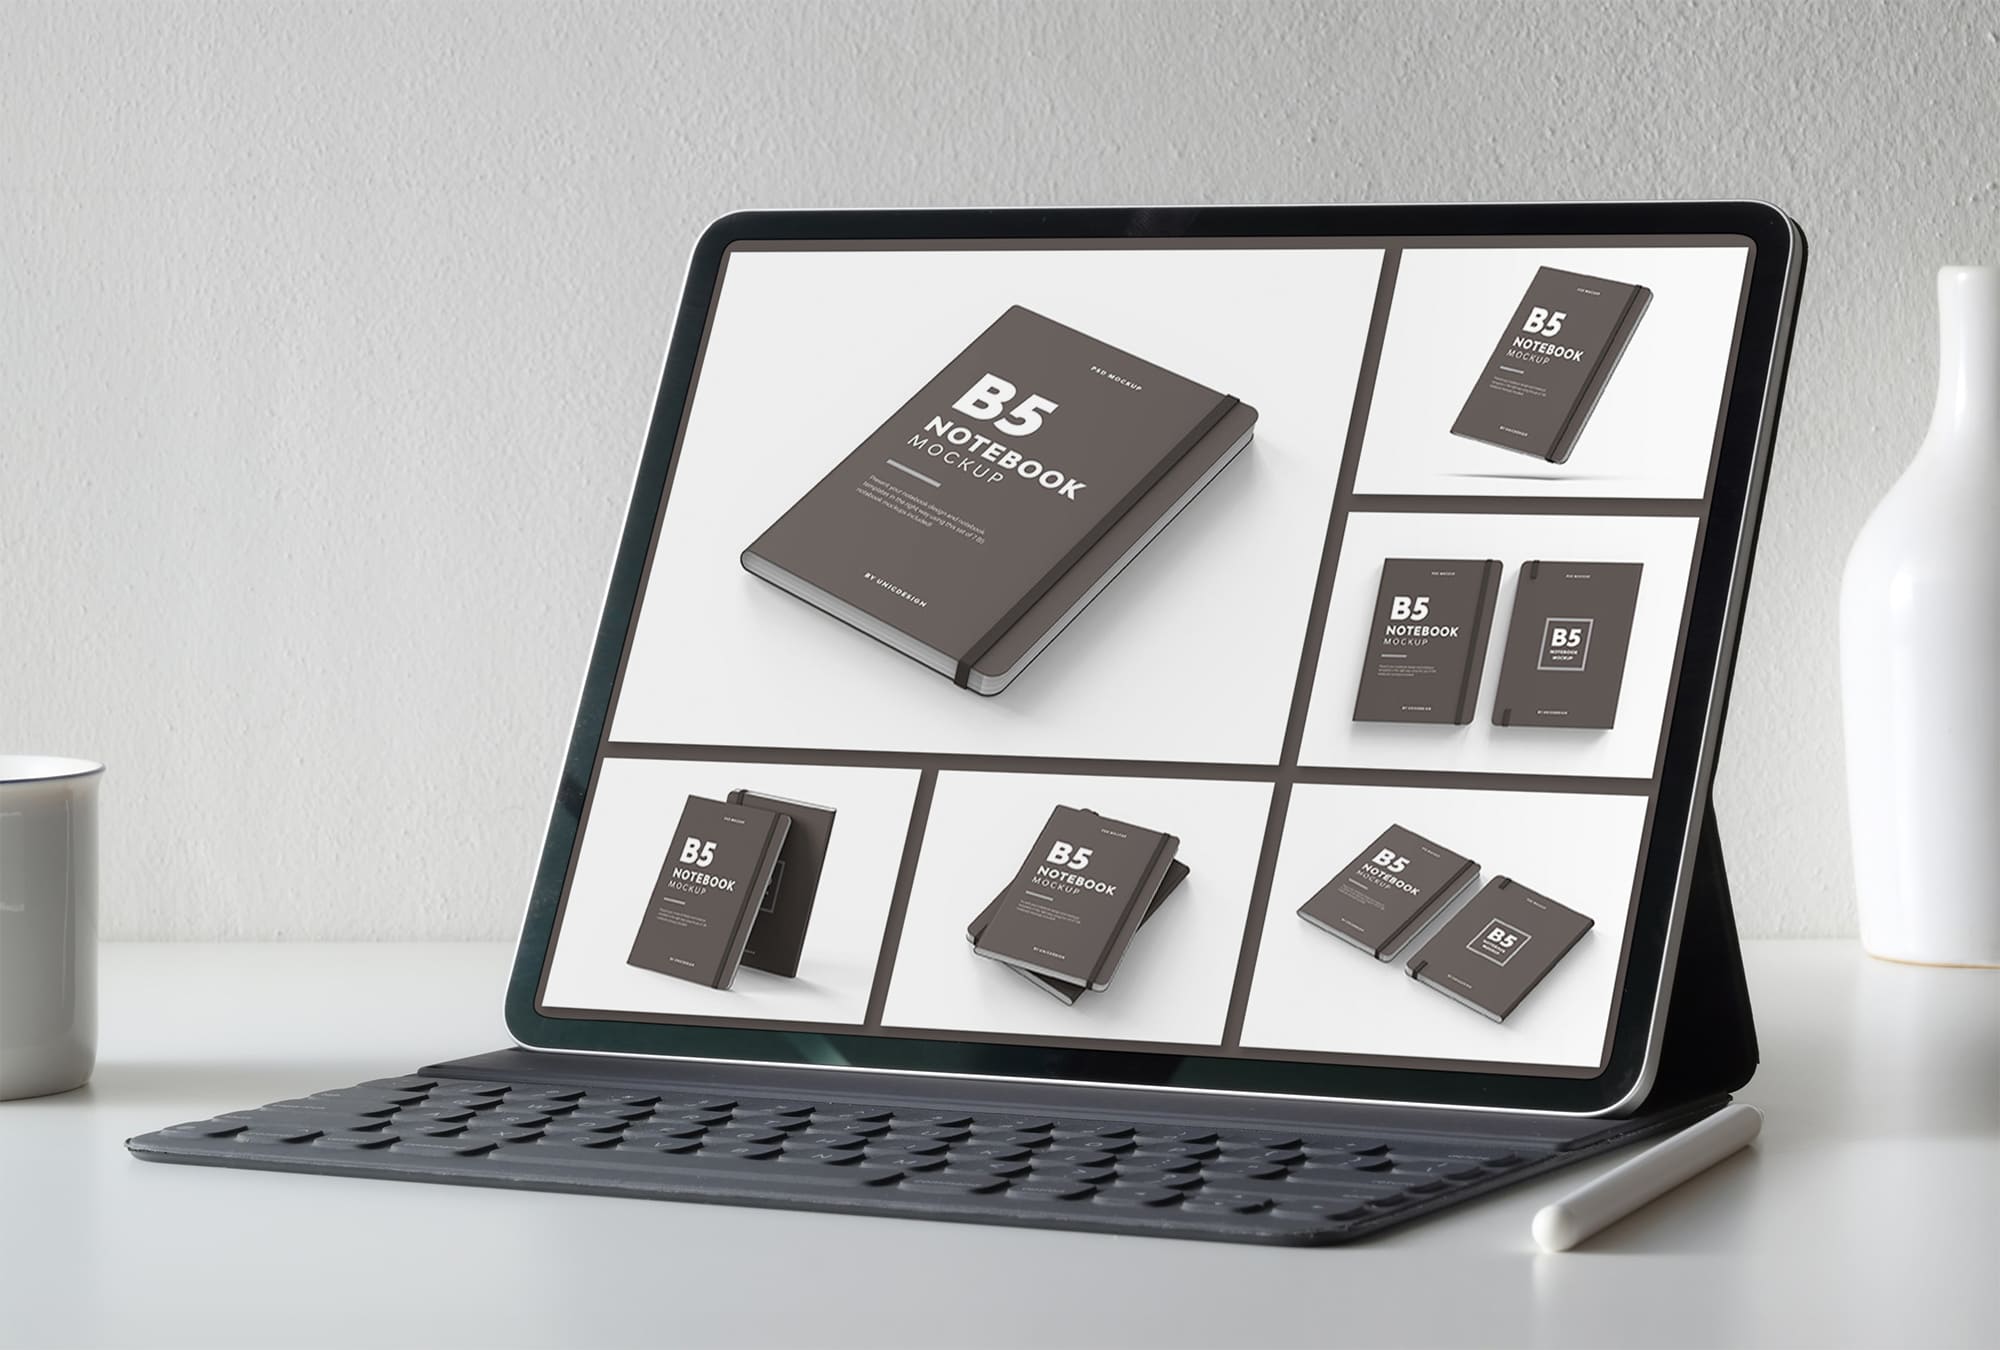 Tablet on screen with images of lovely b5 notebook mockup.